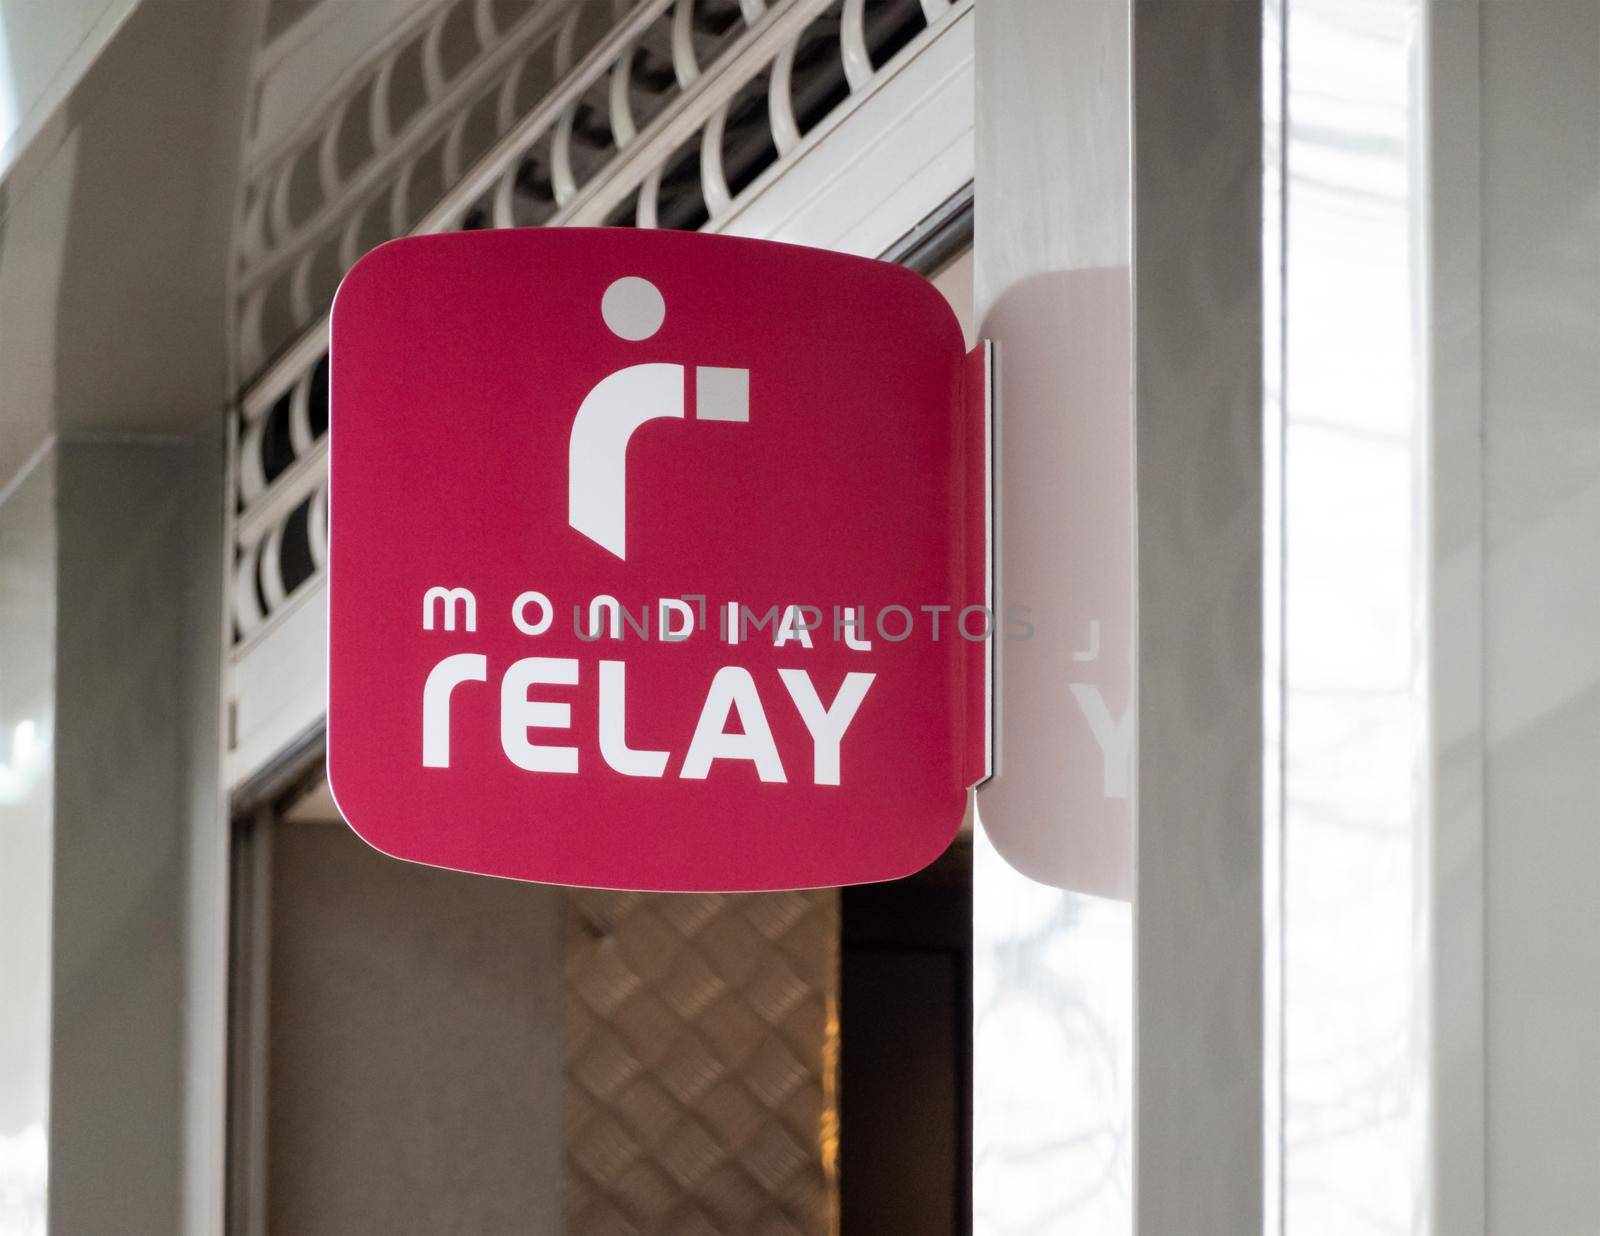 Mondial Relay sign outside shop in Bayonne, France by dutourdumonde